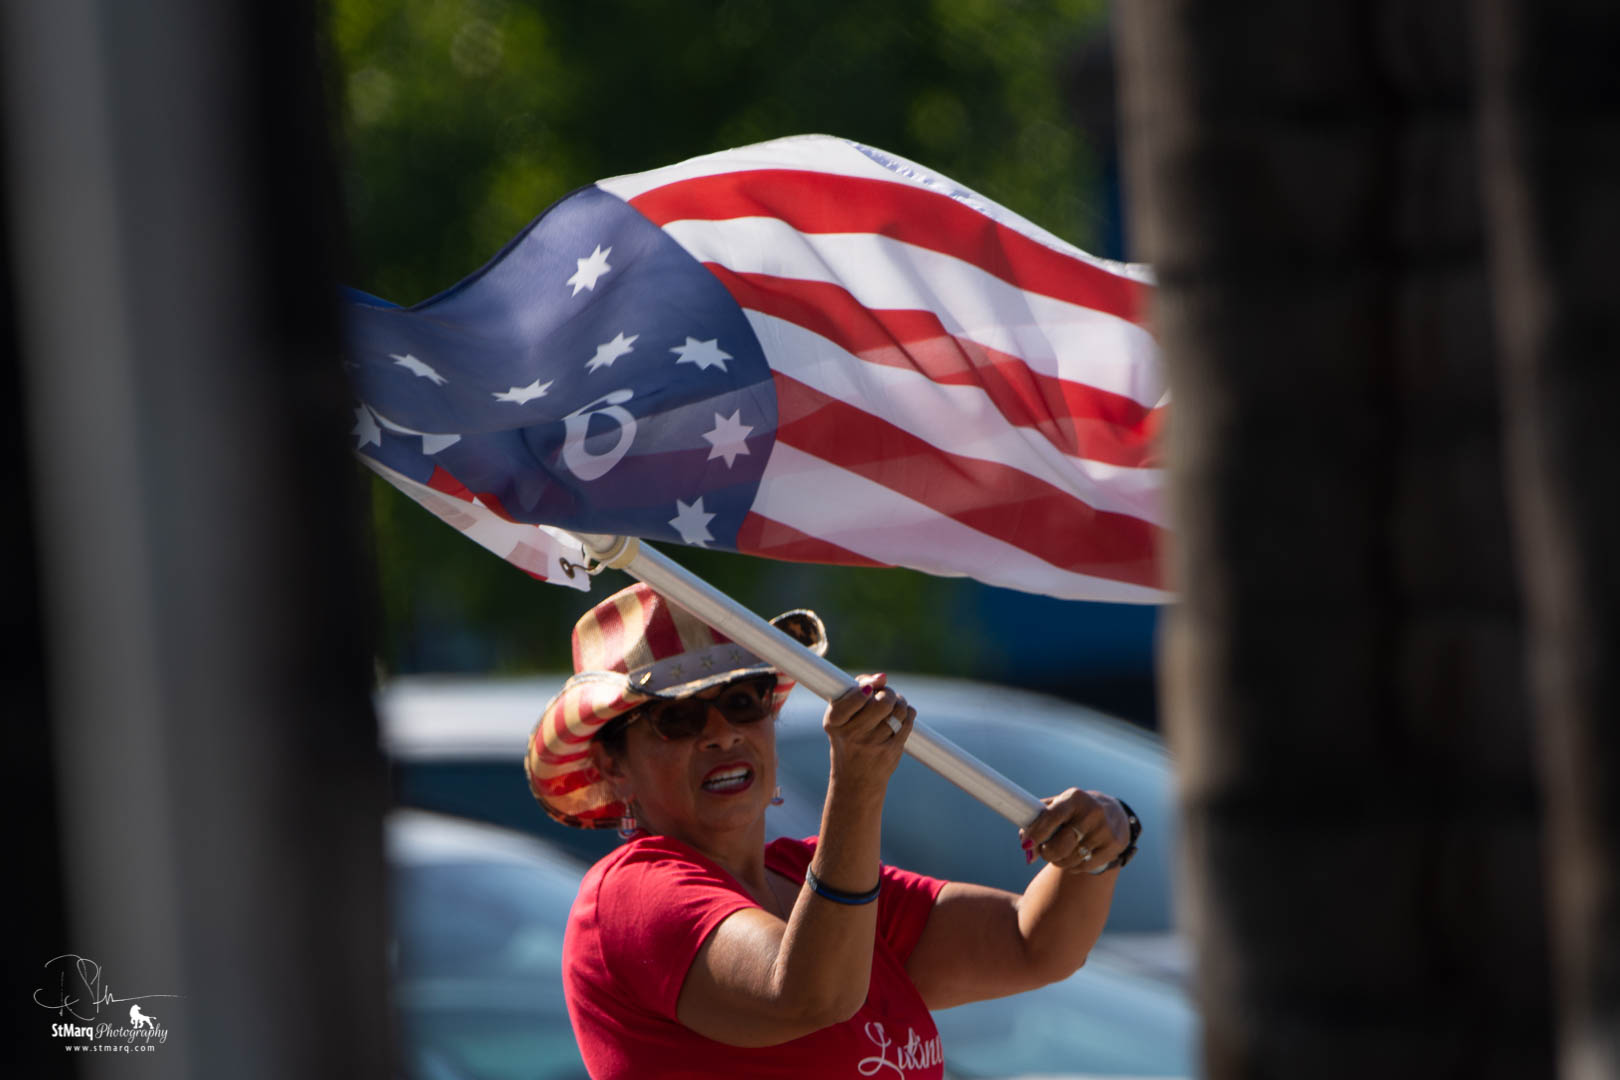 Marilyn Castillo waves the American flag at a Rally in support of President Trump.